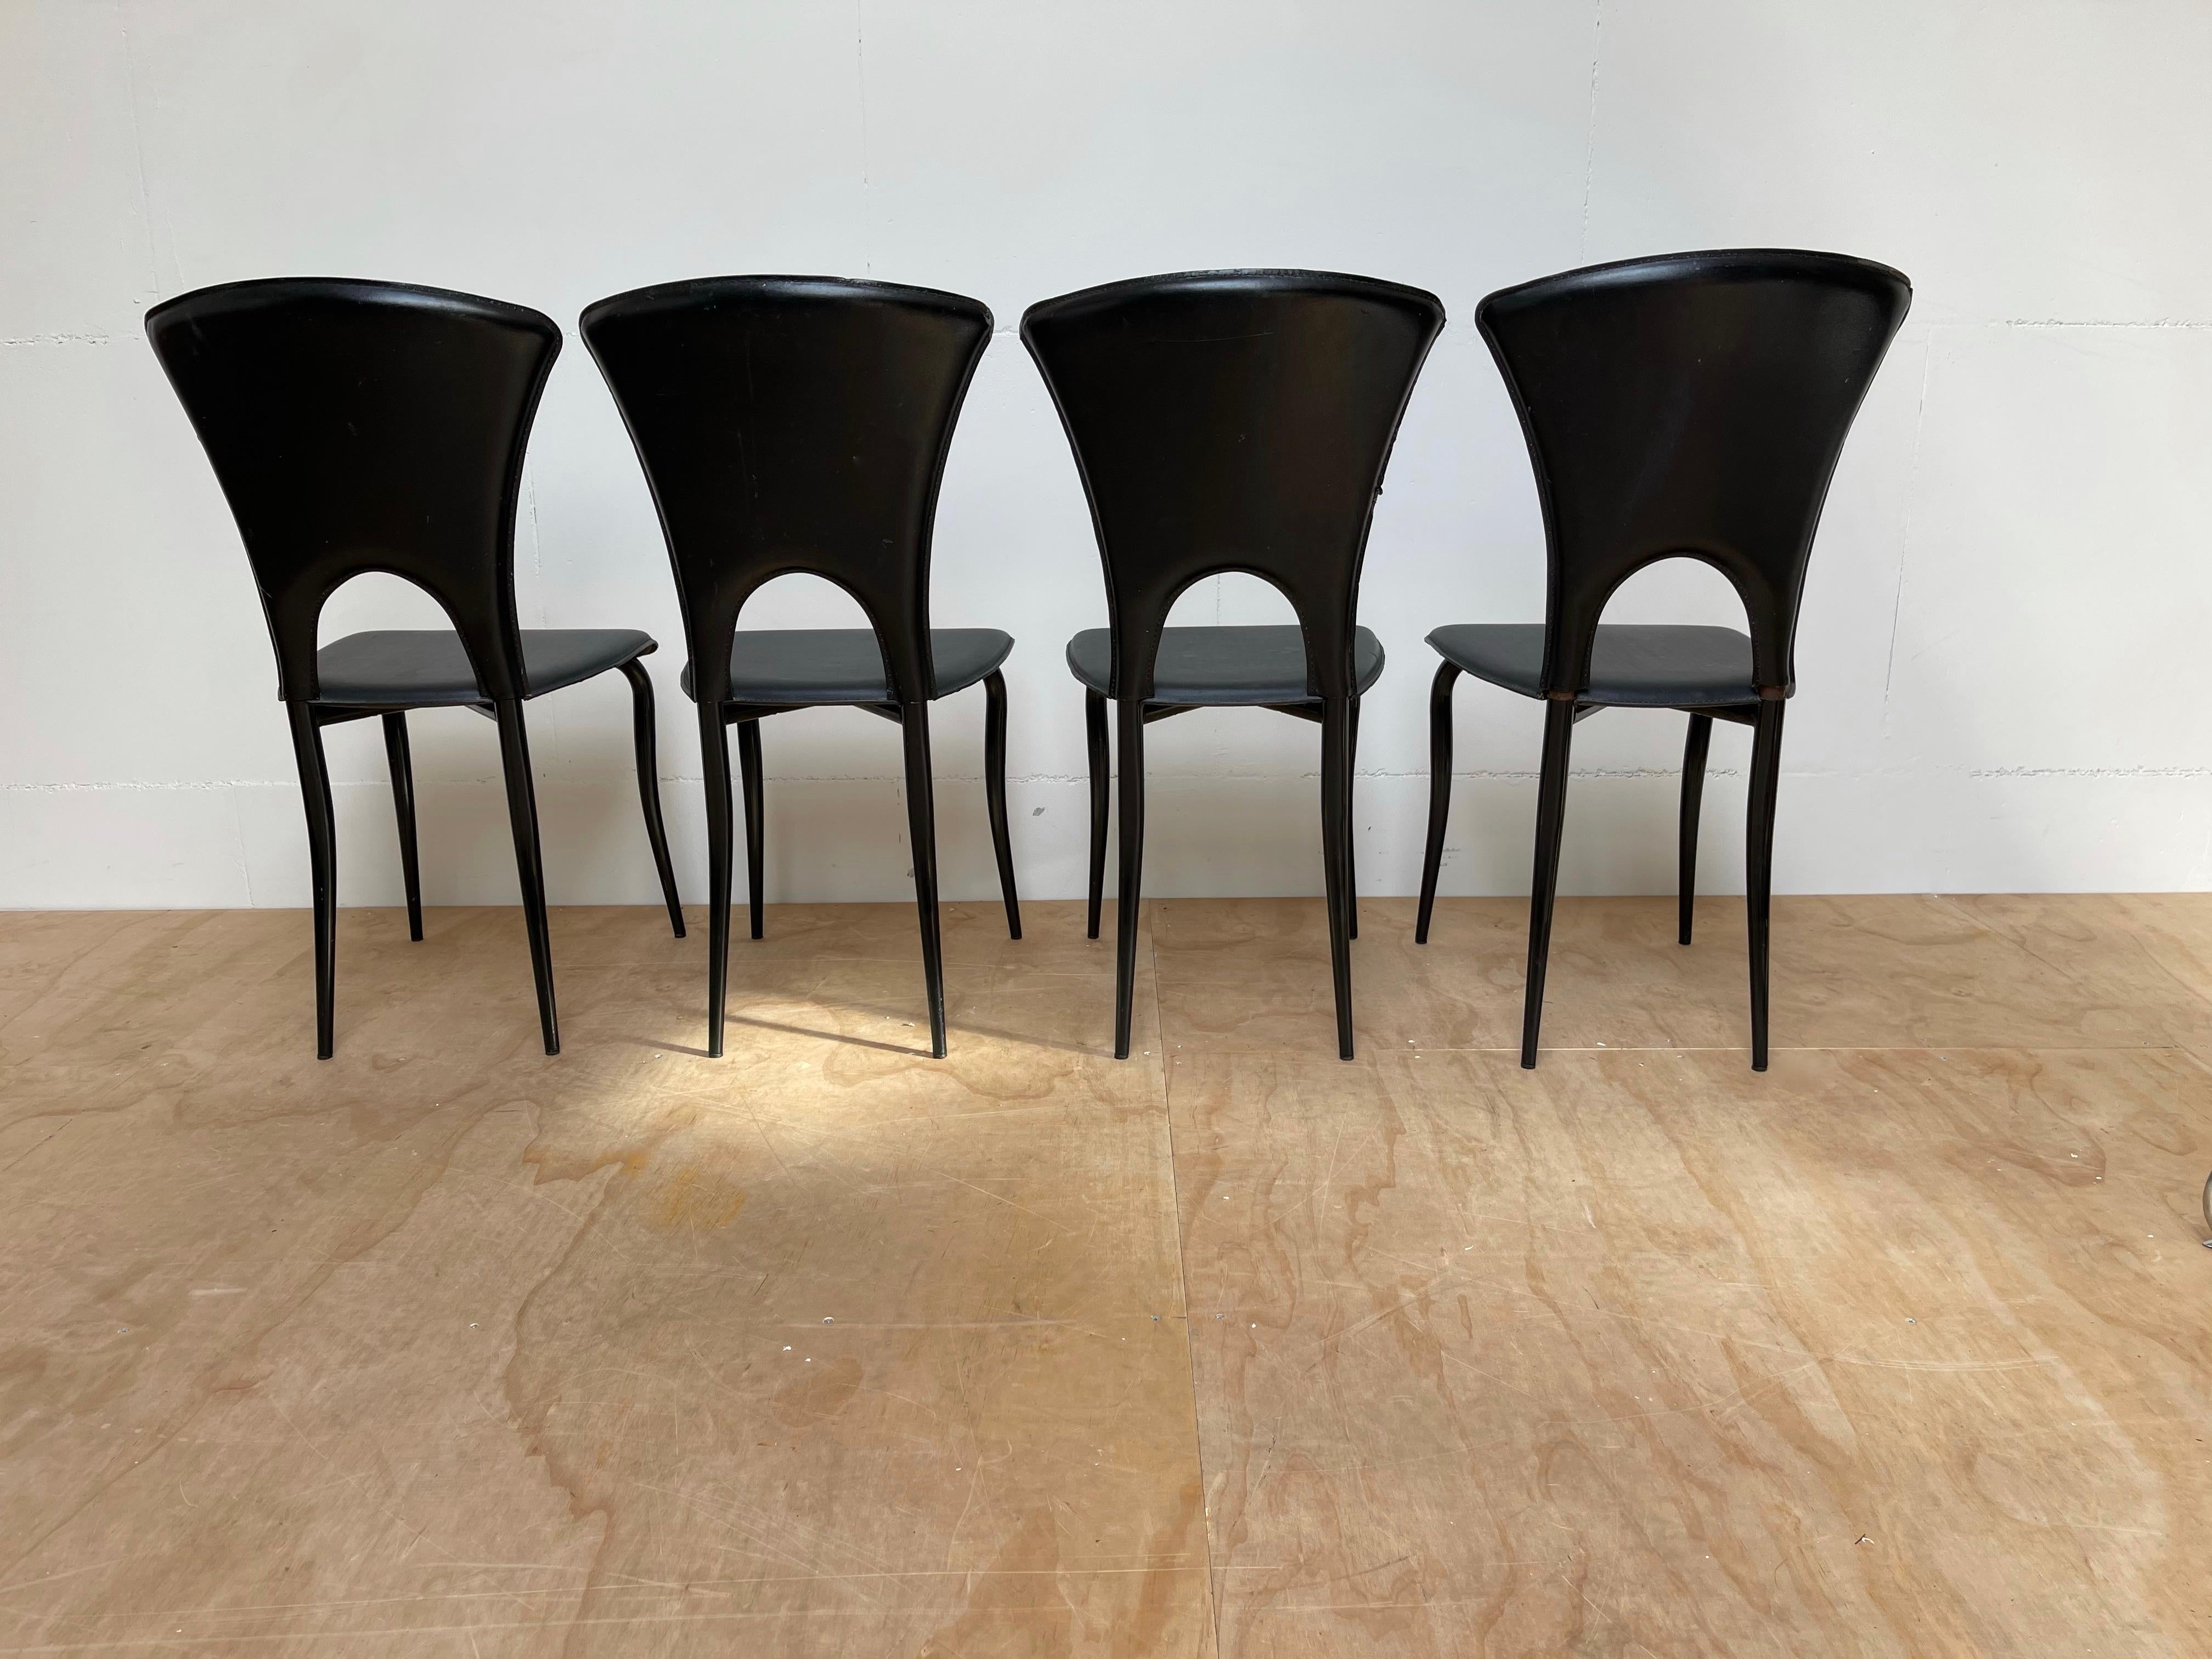 Italian Design Mid-Century Modern Set of 4 Dining Chairs w. Black Leather Seats In Good Condition For Sale In Lisse, NL